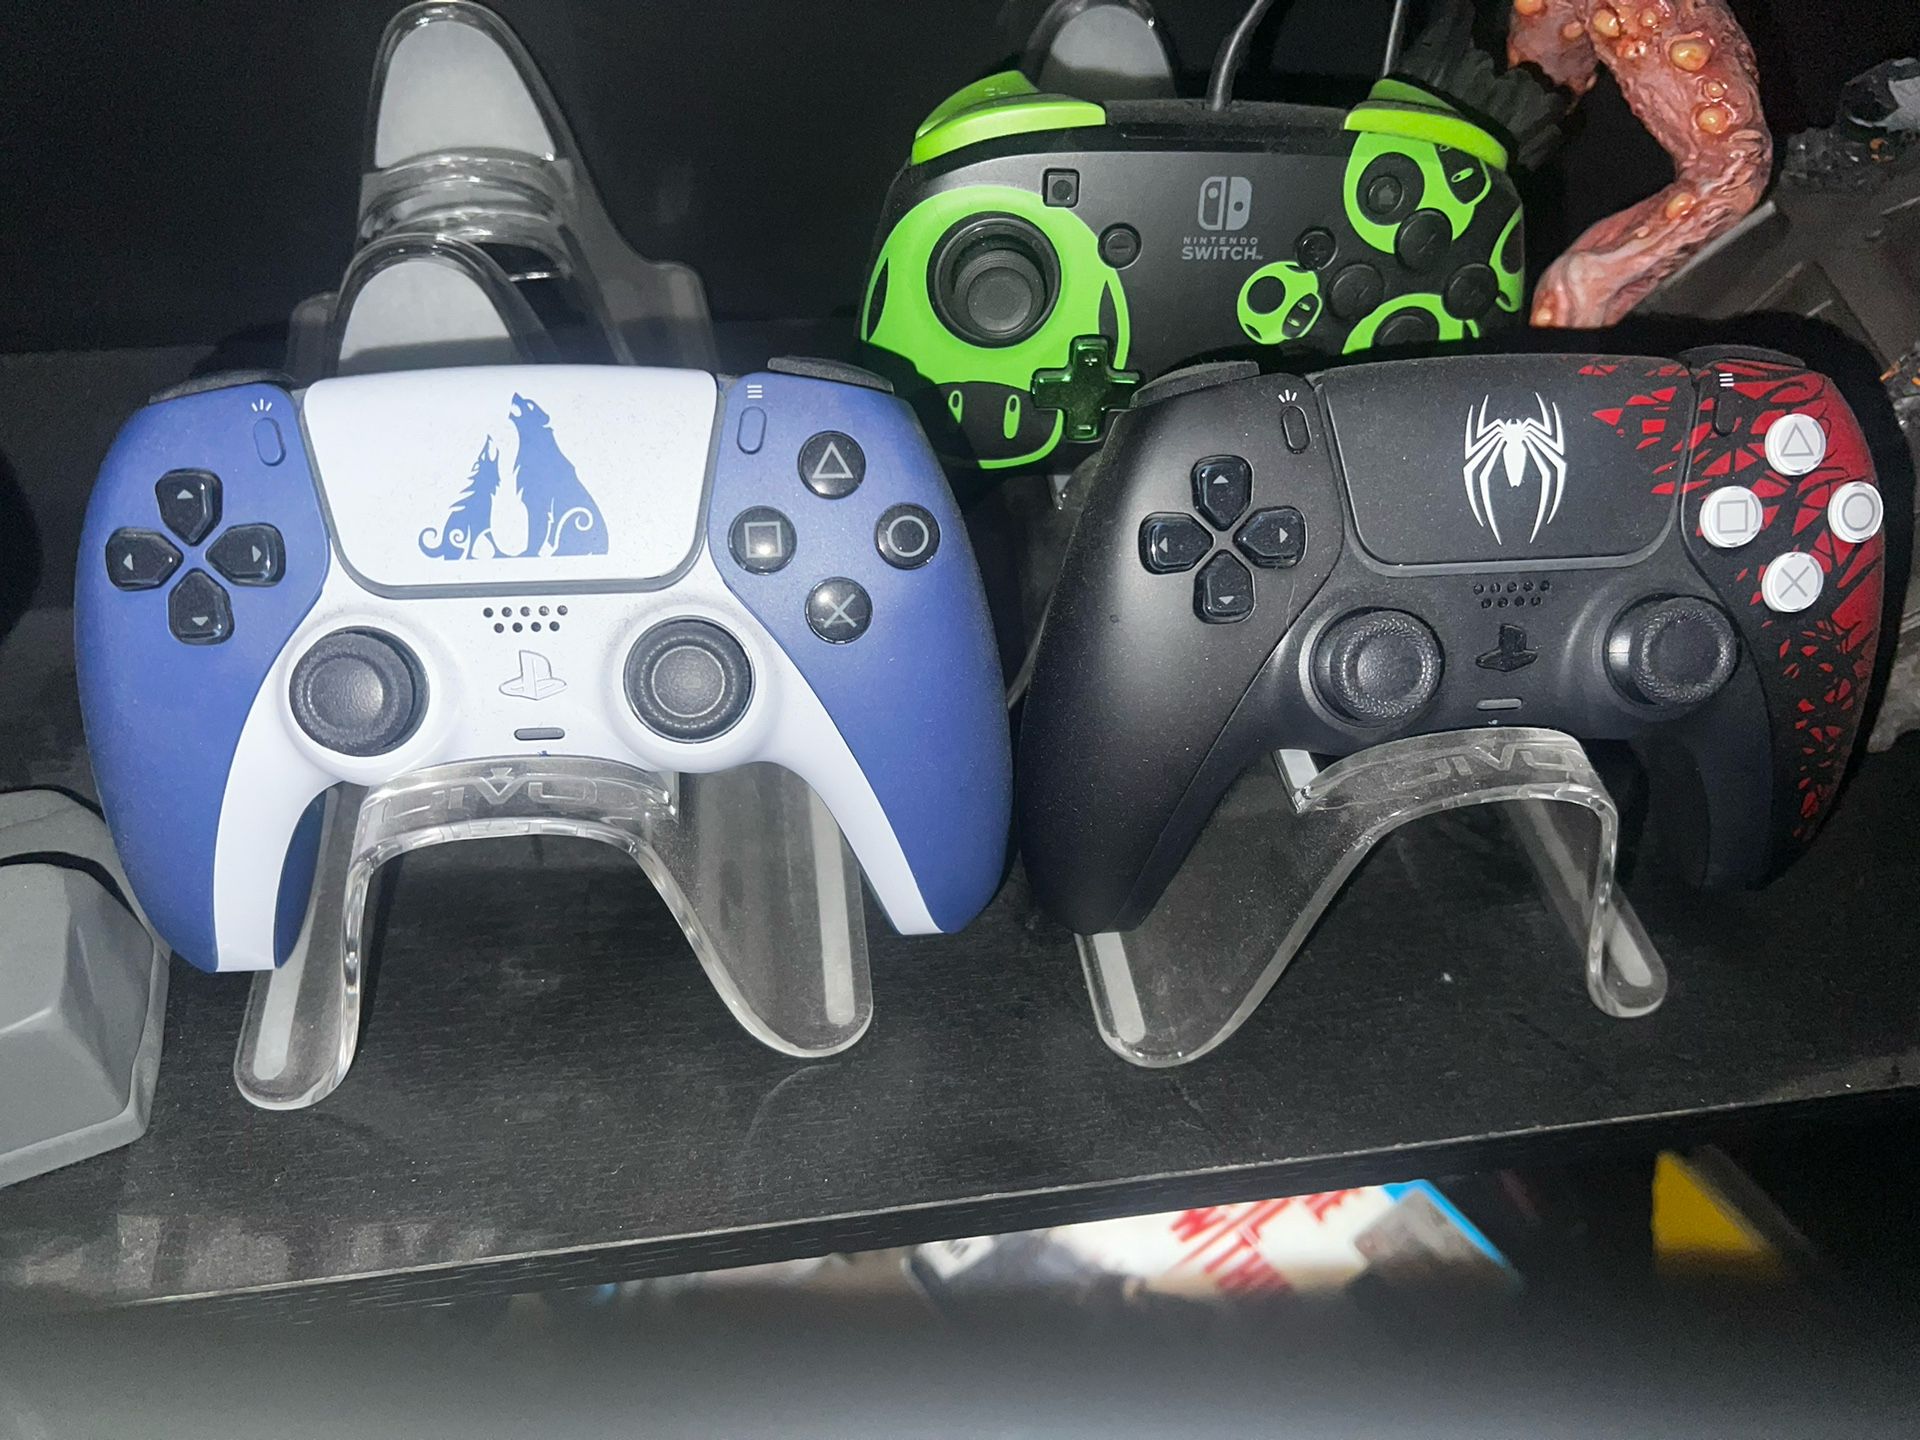 Playstion 5 Limited Edition Controllers